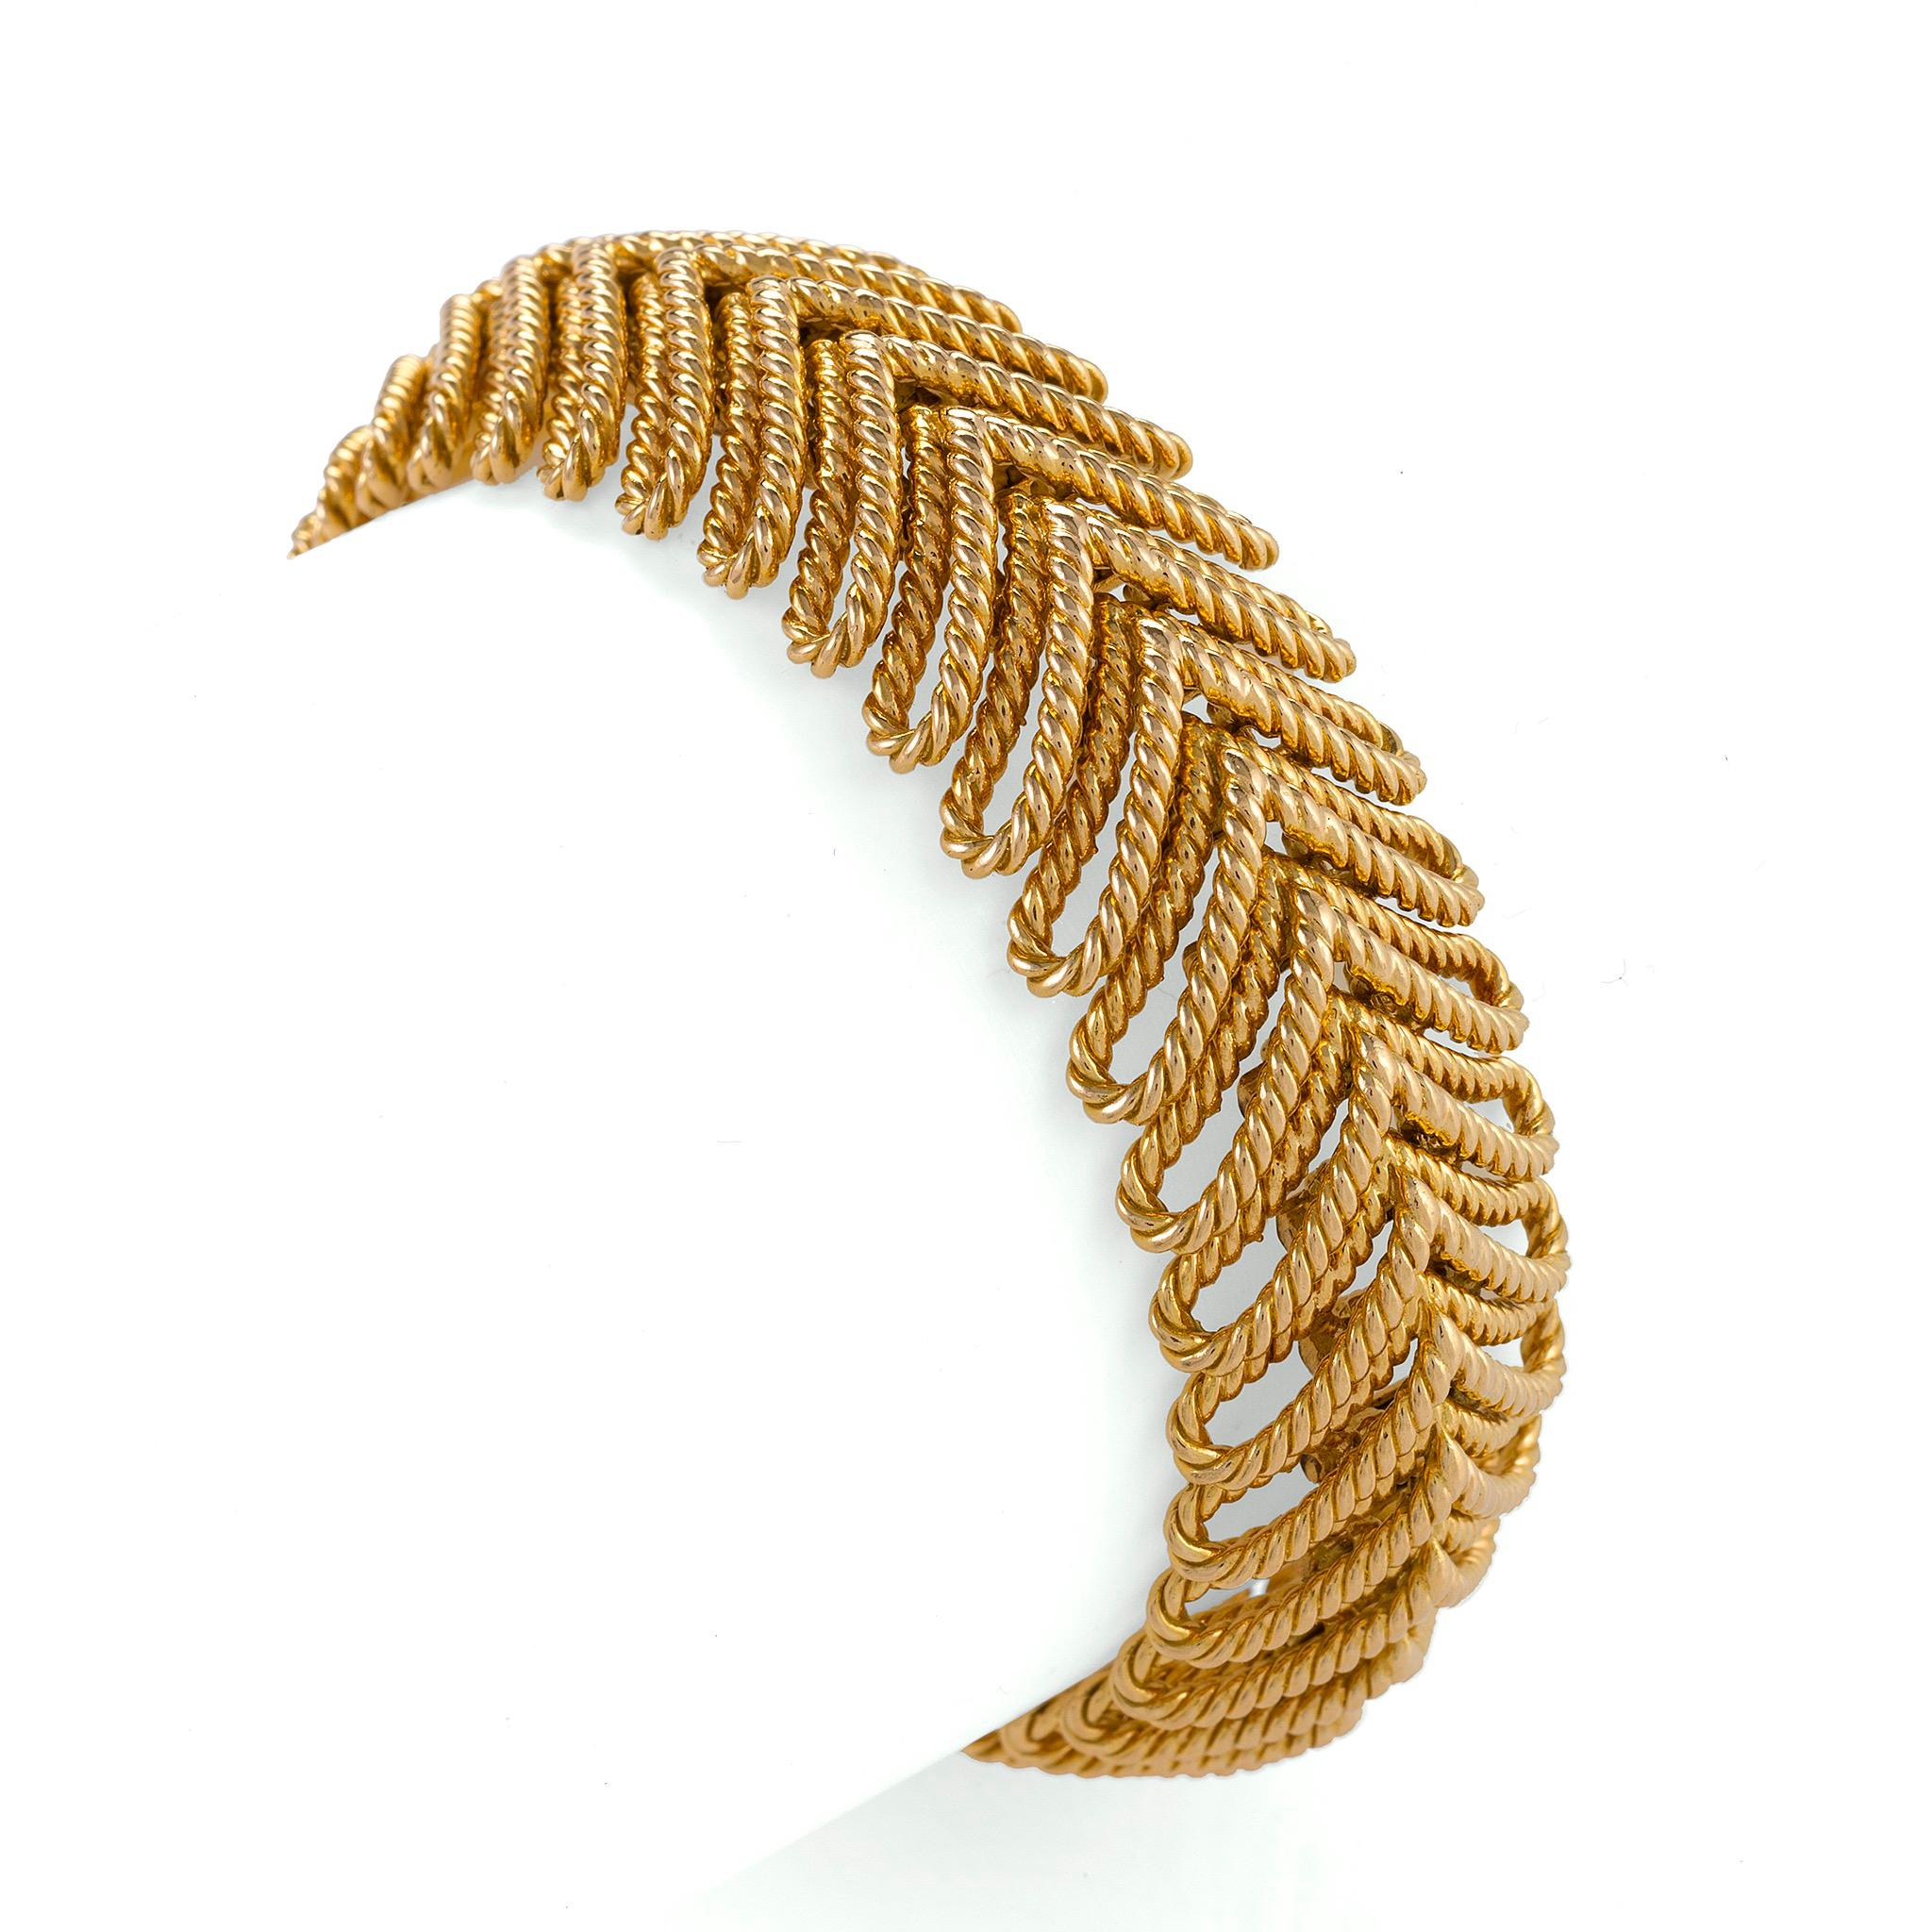 Made in the 1960s, this Van Cleef & Arpels Paris gold ropetwist bracelet is composed of a symmetrical line of flexible, gently-looping open links. Soft, flexible and richly textured, with a sense of airy 1960s freedom, this bracelet exudes warmth